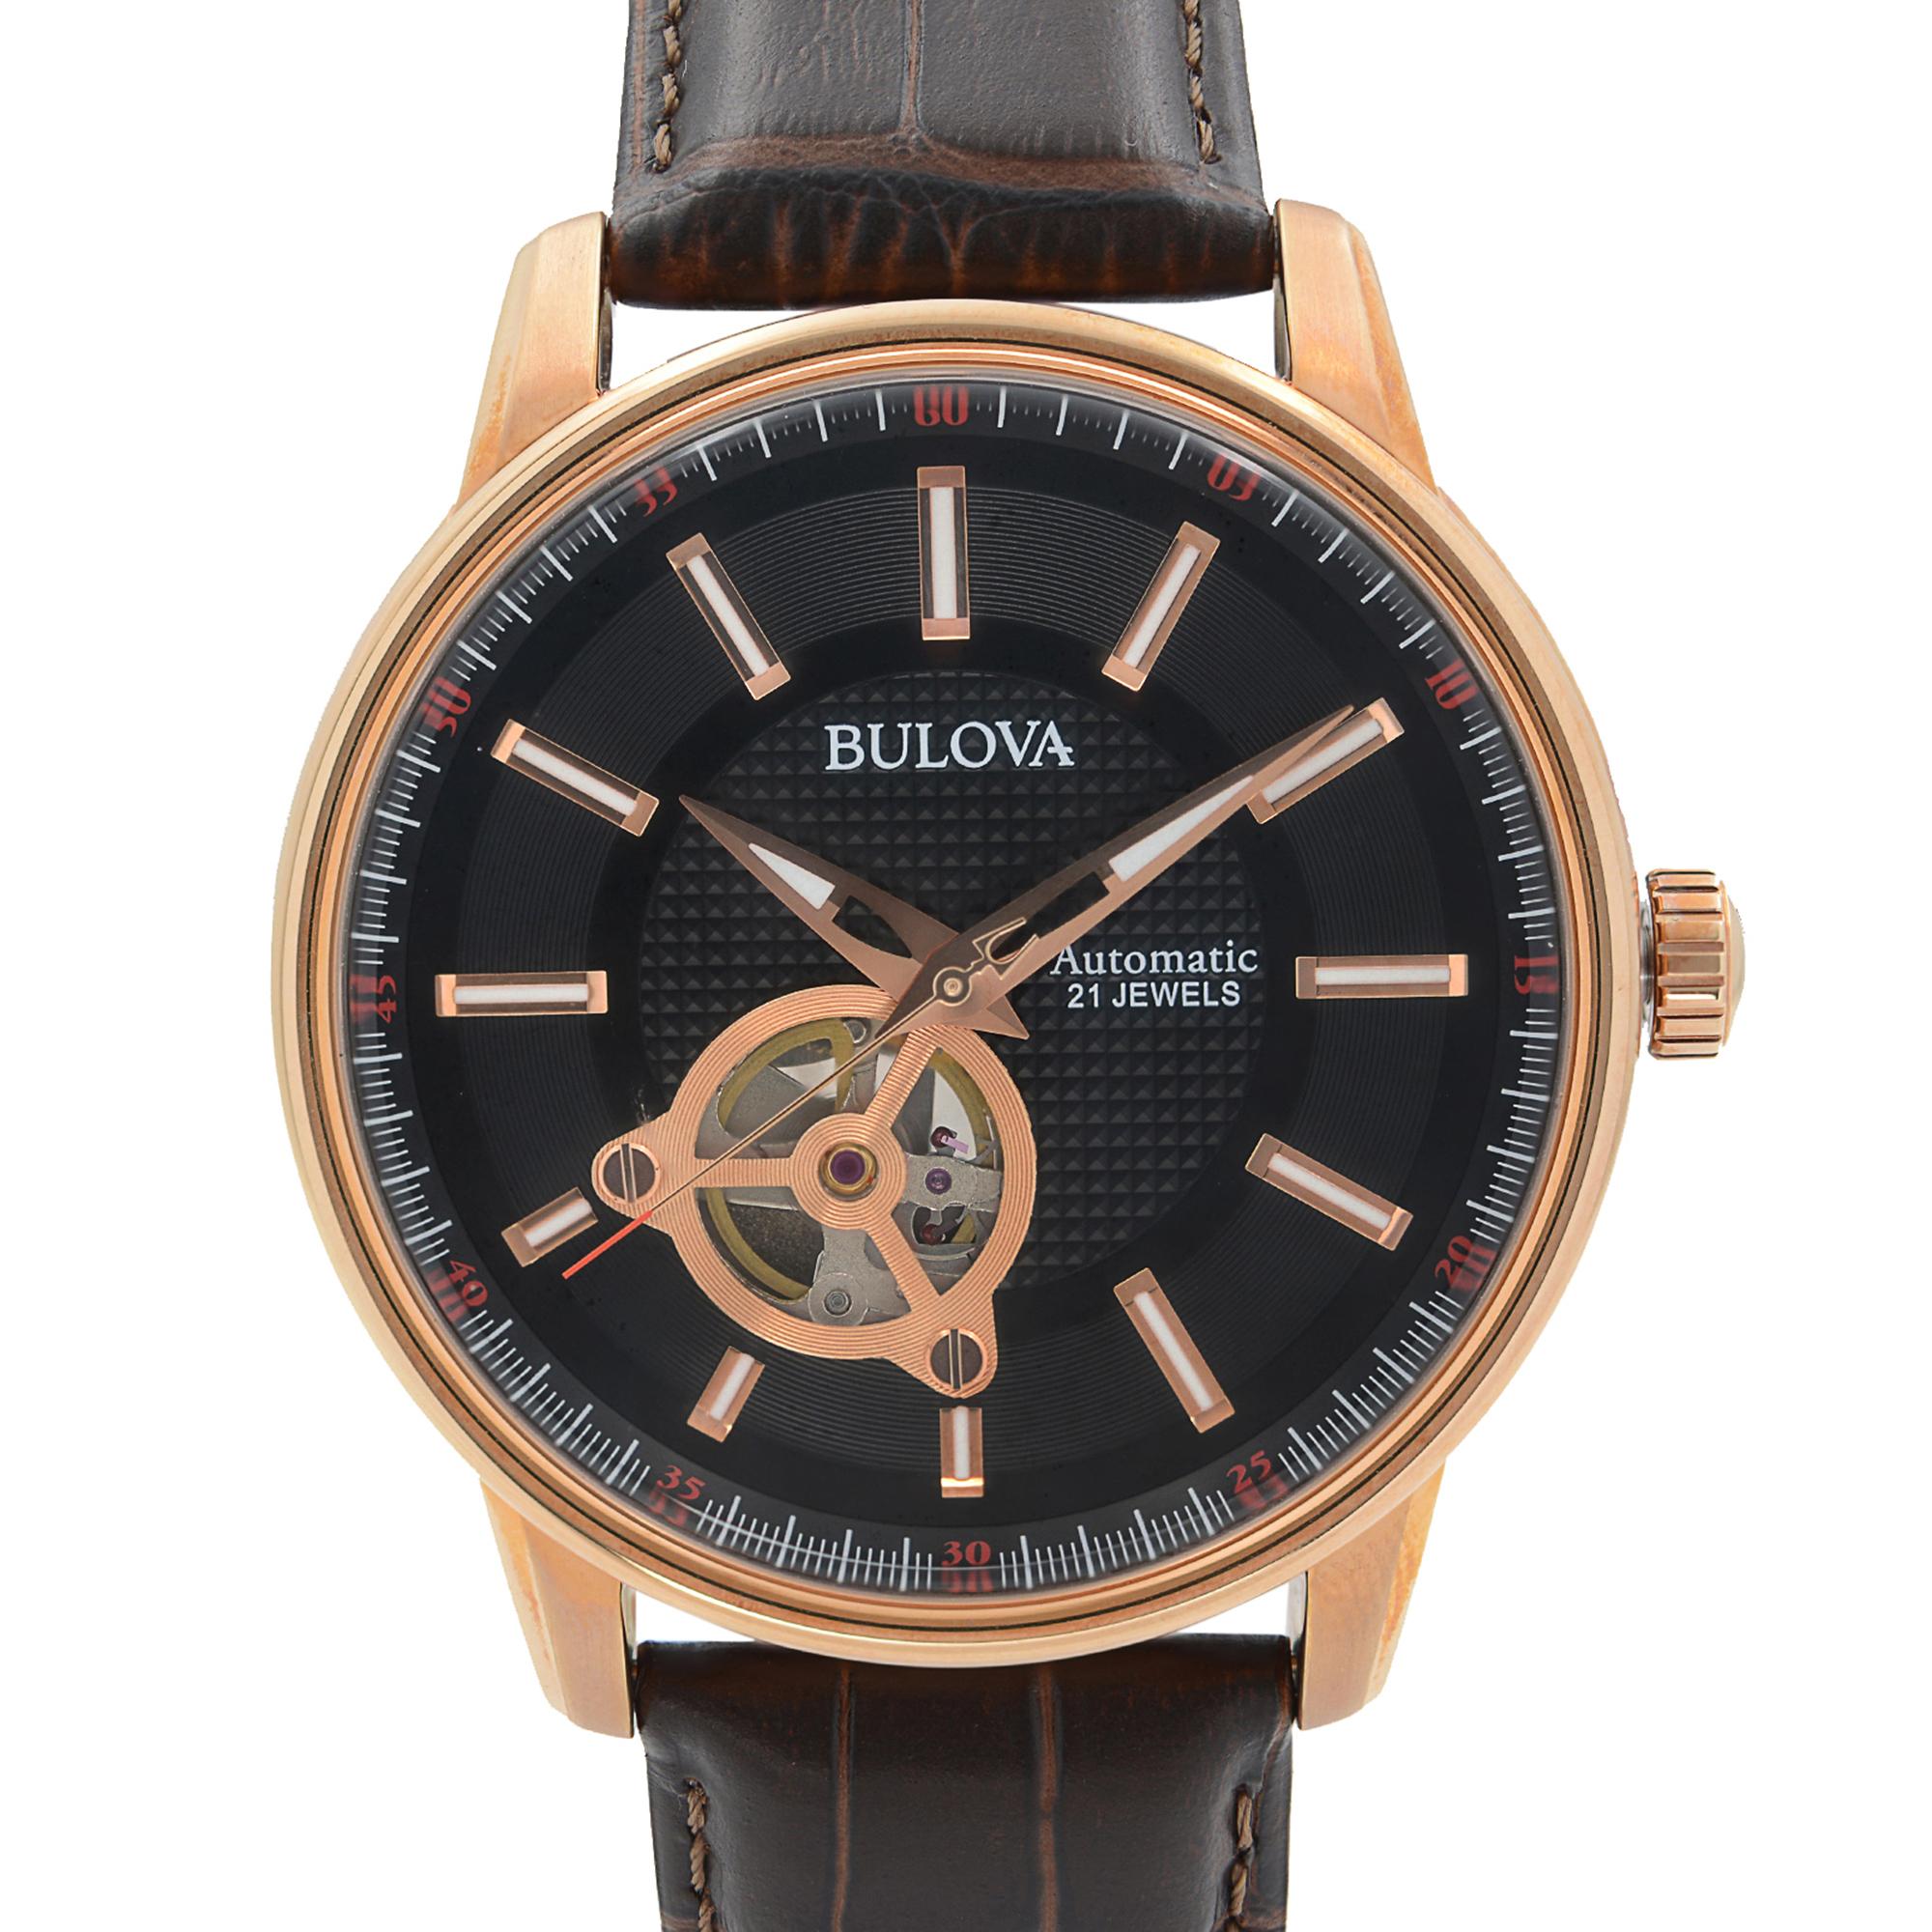 New With Defects Bulova 97A109. The Watch has Minor Scratches on the Case Due to Storing. This Beautiful Timepiece Features: Rose Gold-Tone Stainless Steel Case with a Brown Alligator Leather Strap, Fixed Steel Bezel, Black (Skeletal Window) Dial